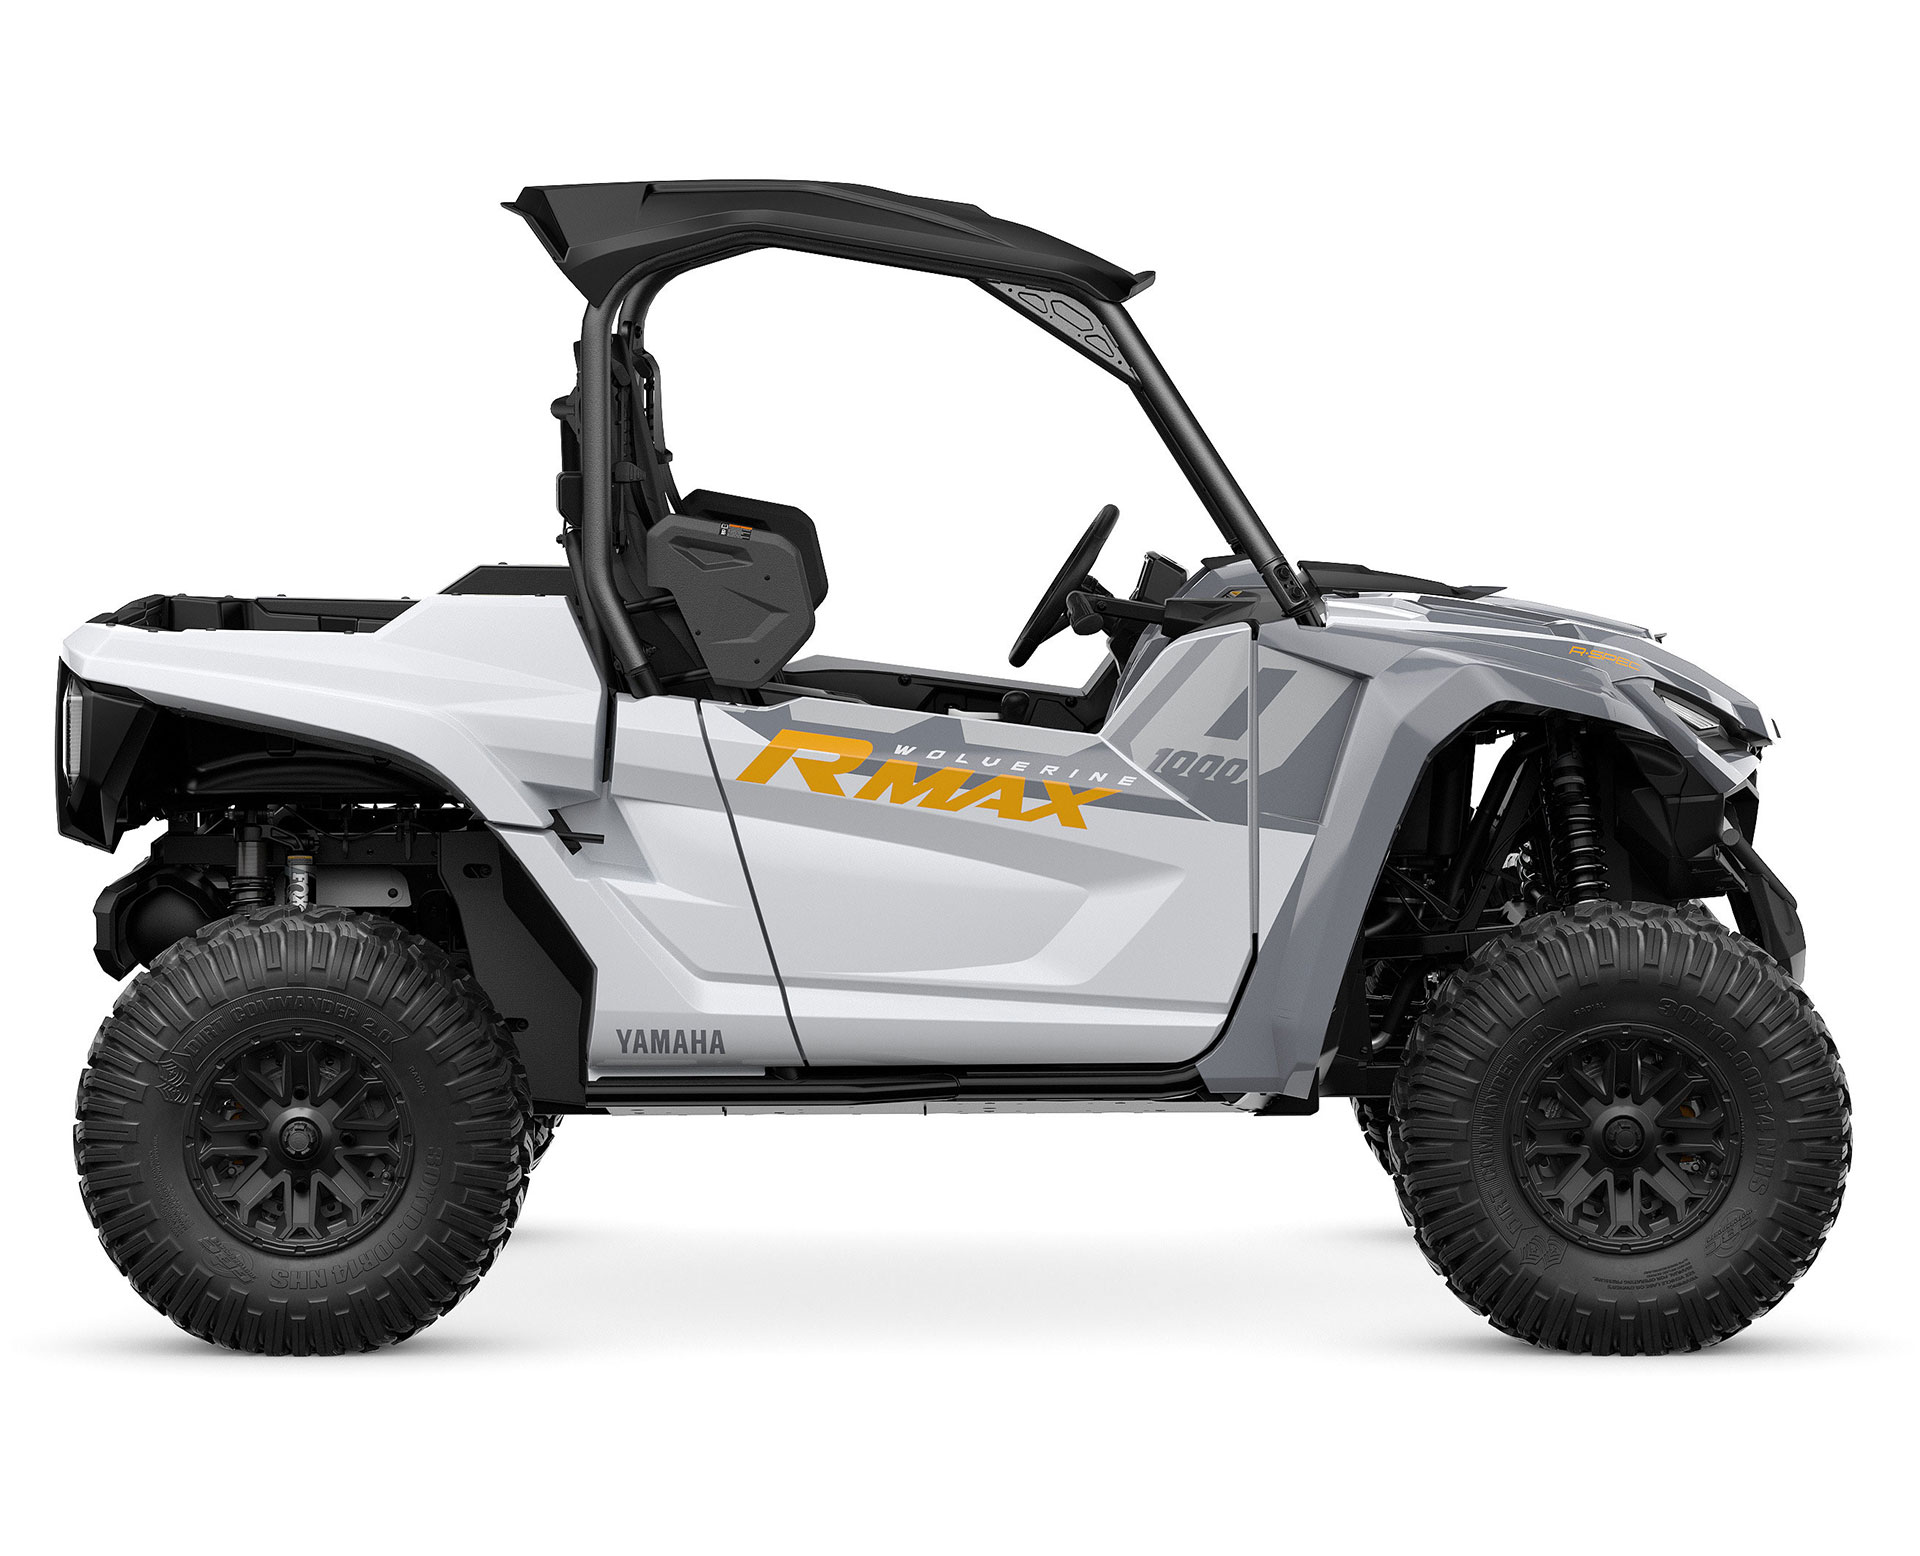 Thumbnail of your customized WOLVERINE(MD) RMAX(MC) 2 1000 R-SPEC 2024